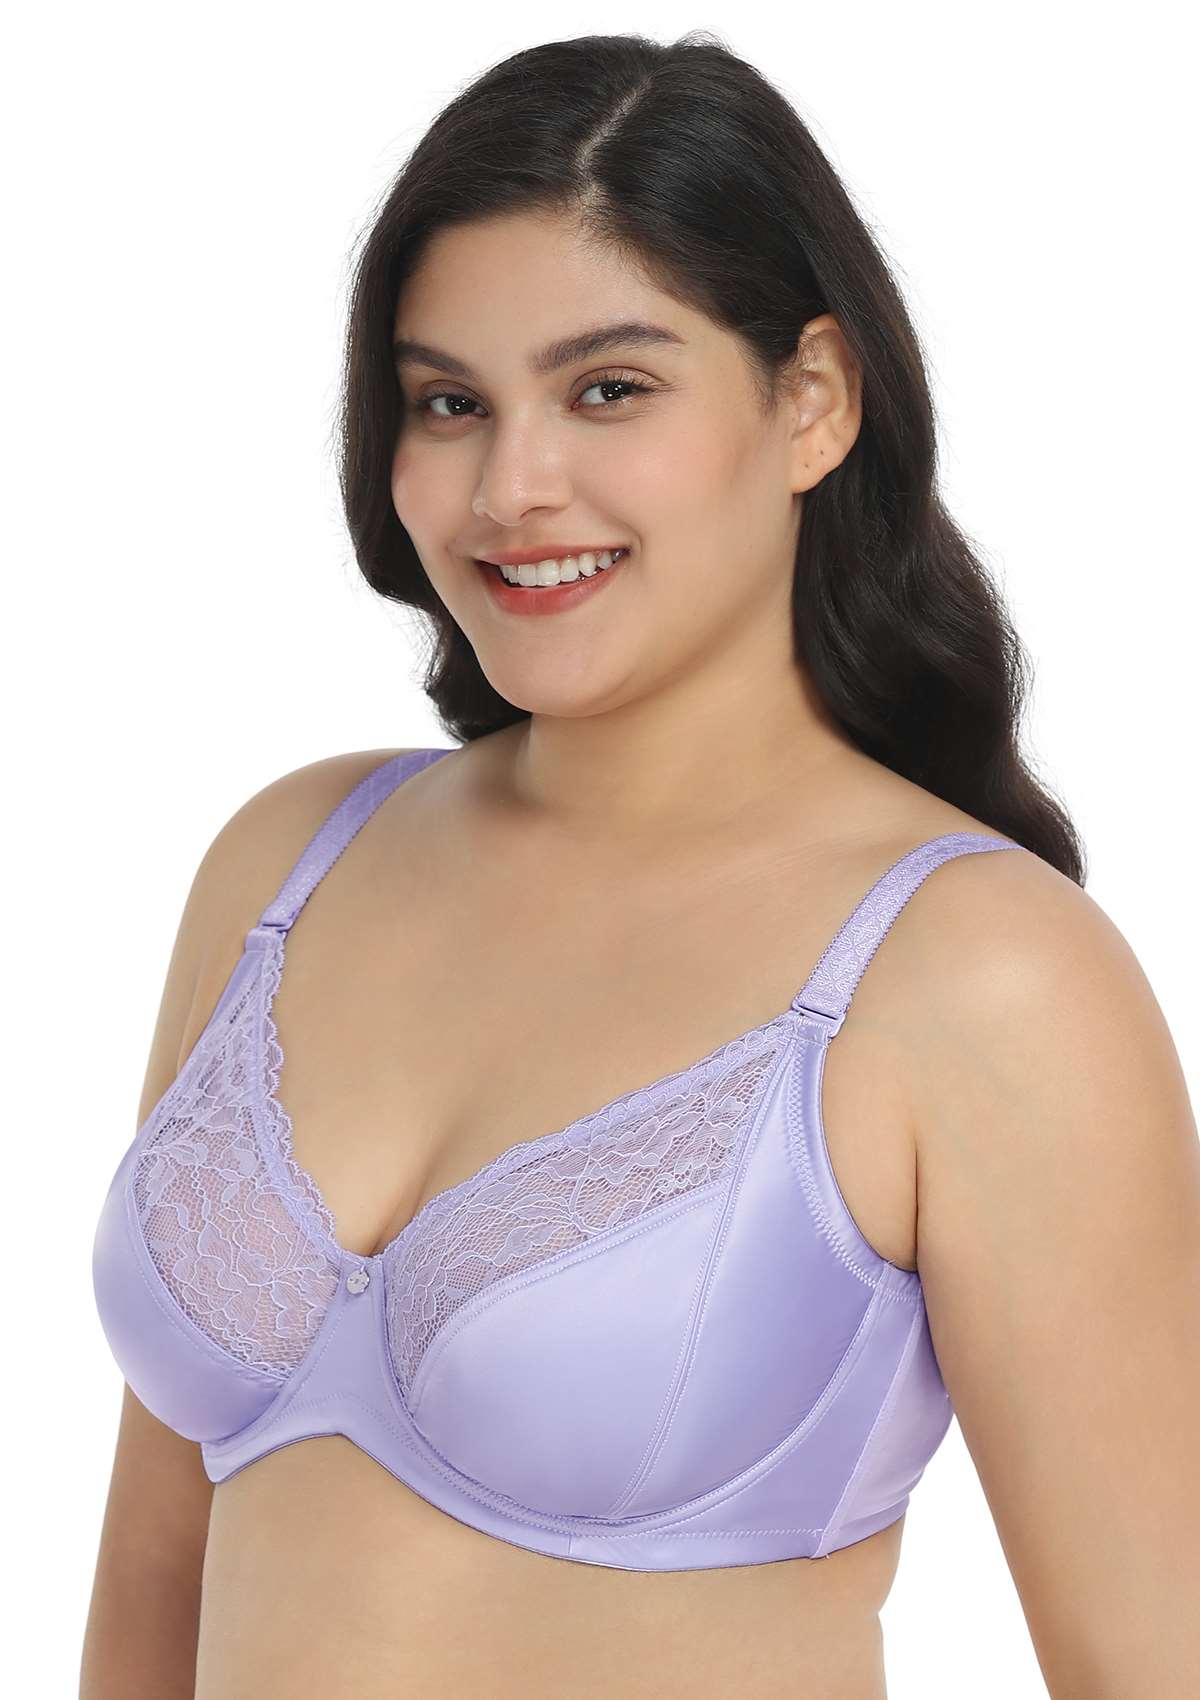 HSIA Foxy Satin Smooth Floral Lace Full Coverage Underwire Bra Set - Purple / 38 / D